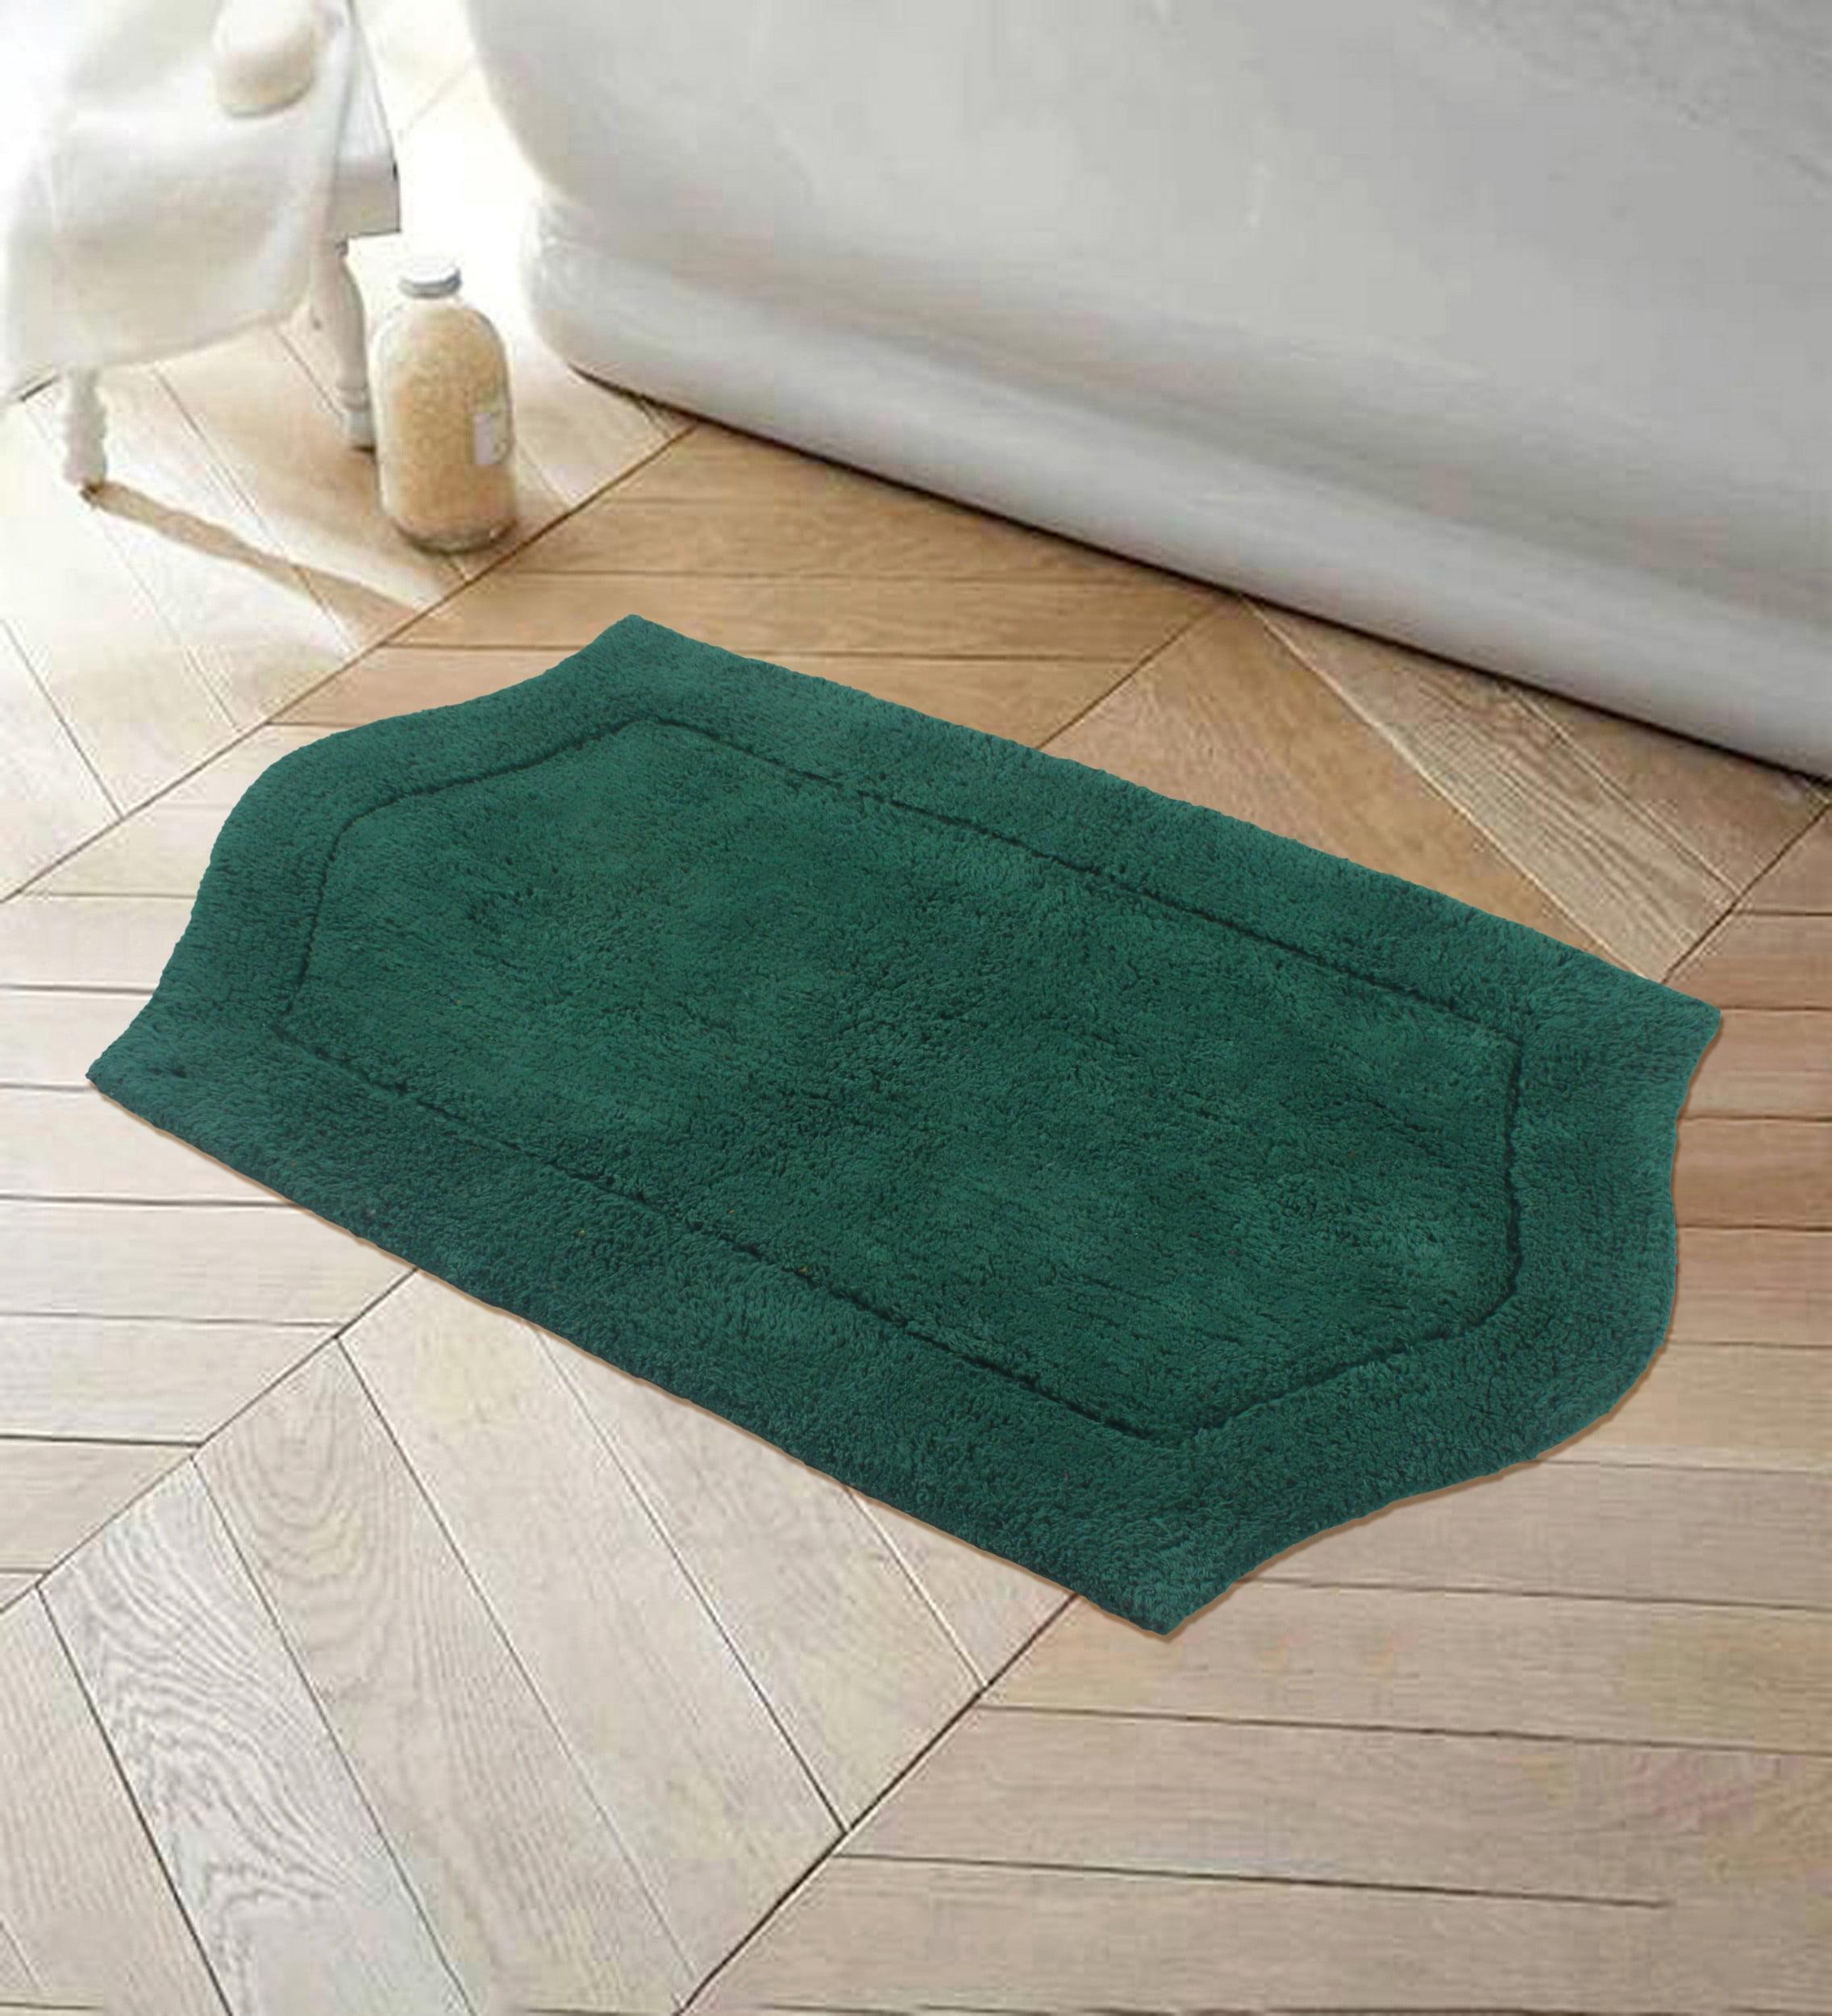 Waterford Collection Plush Bottle Green Cotton Bath Rug, 21"x34"